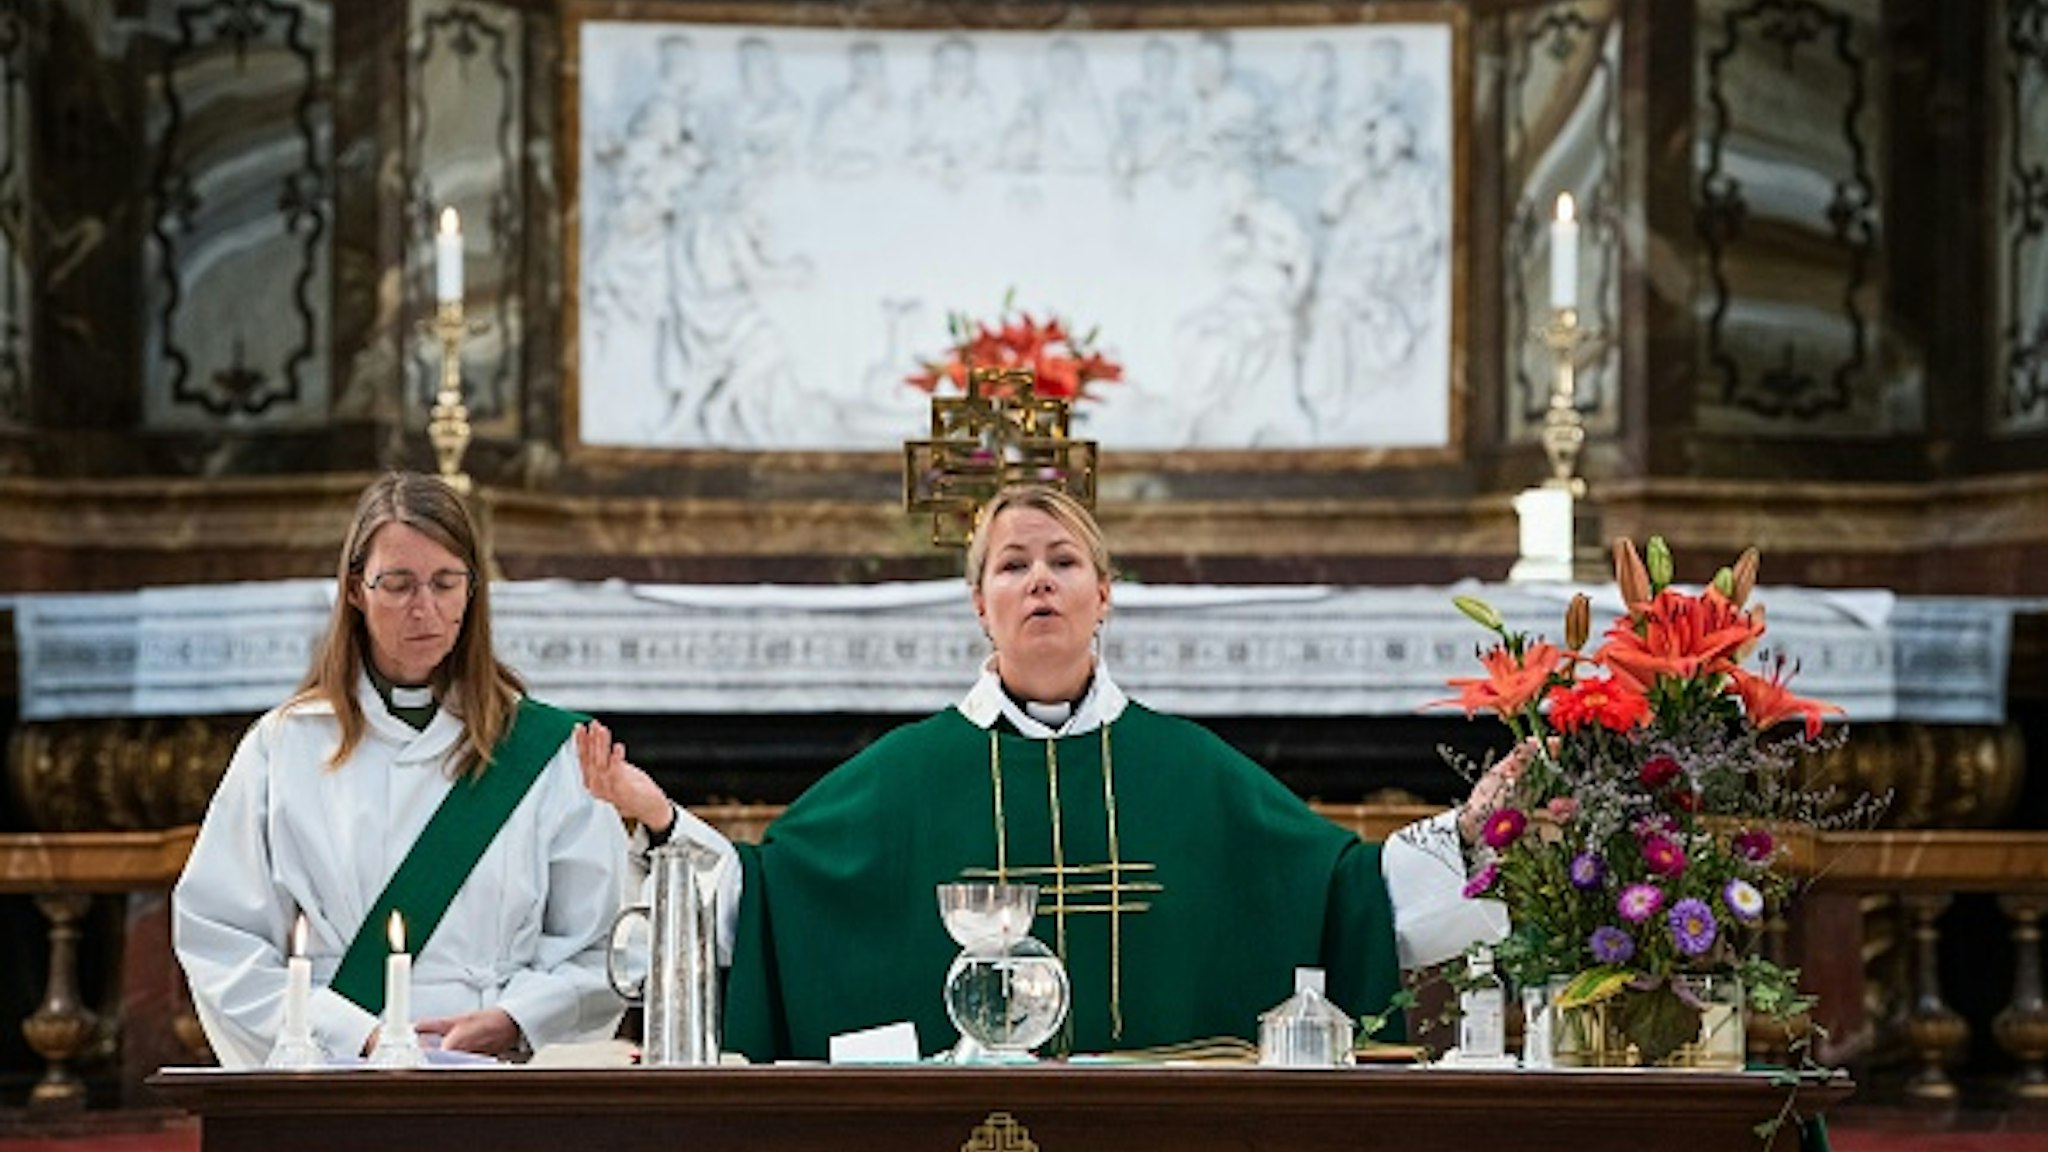 Priest Sandra Signarsdotter (R) and Deacon Ingrid El Qortobi gives the Sunday service at Gustaf Vasa Church in Odenplan, Stockholm on August 23, 2020. - In the Scandinavian country, often hailed as a champion of gender equality, the statistics are clear. As of July, 50.1 percent of priests are women and 49.9 percent are men.